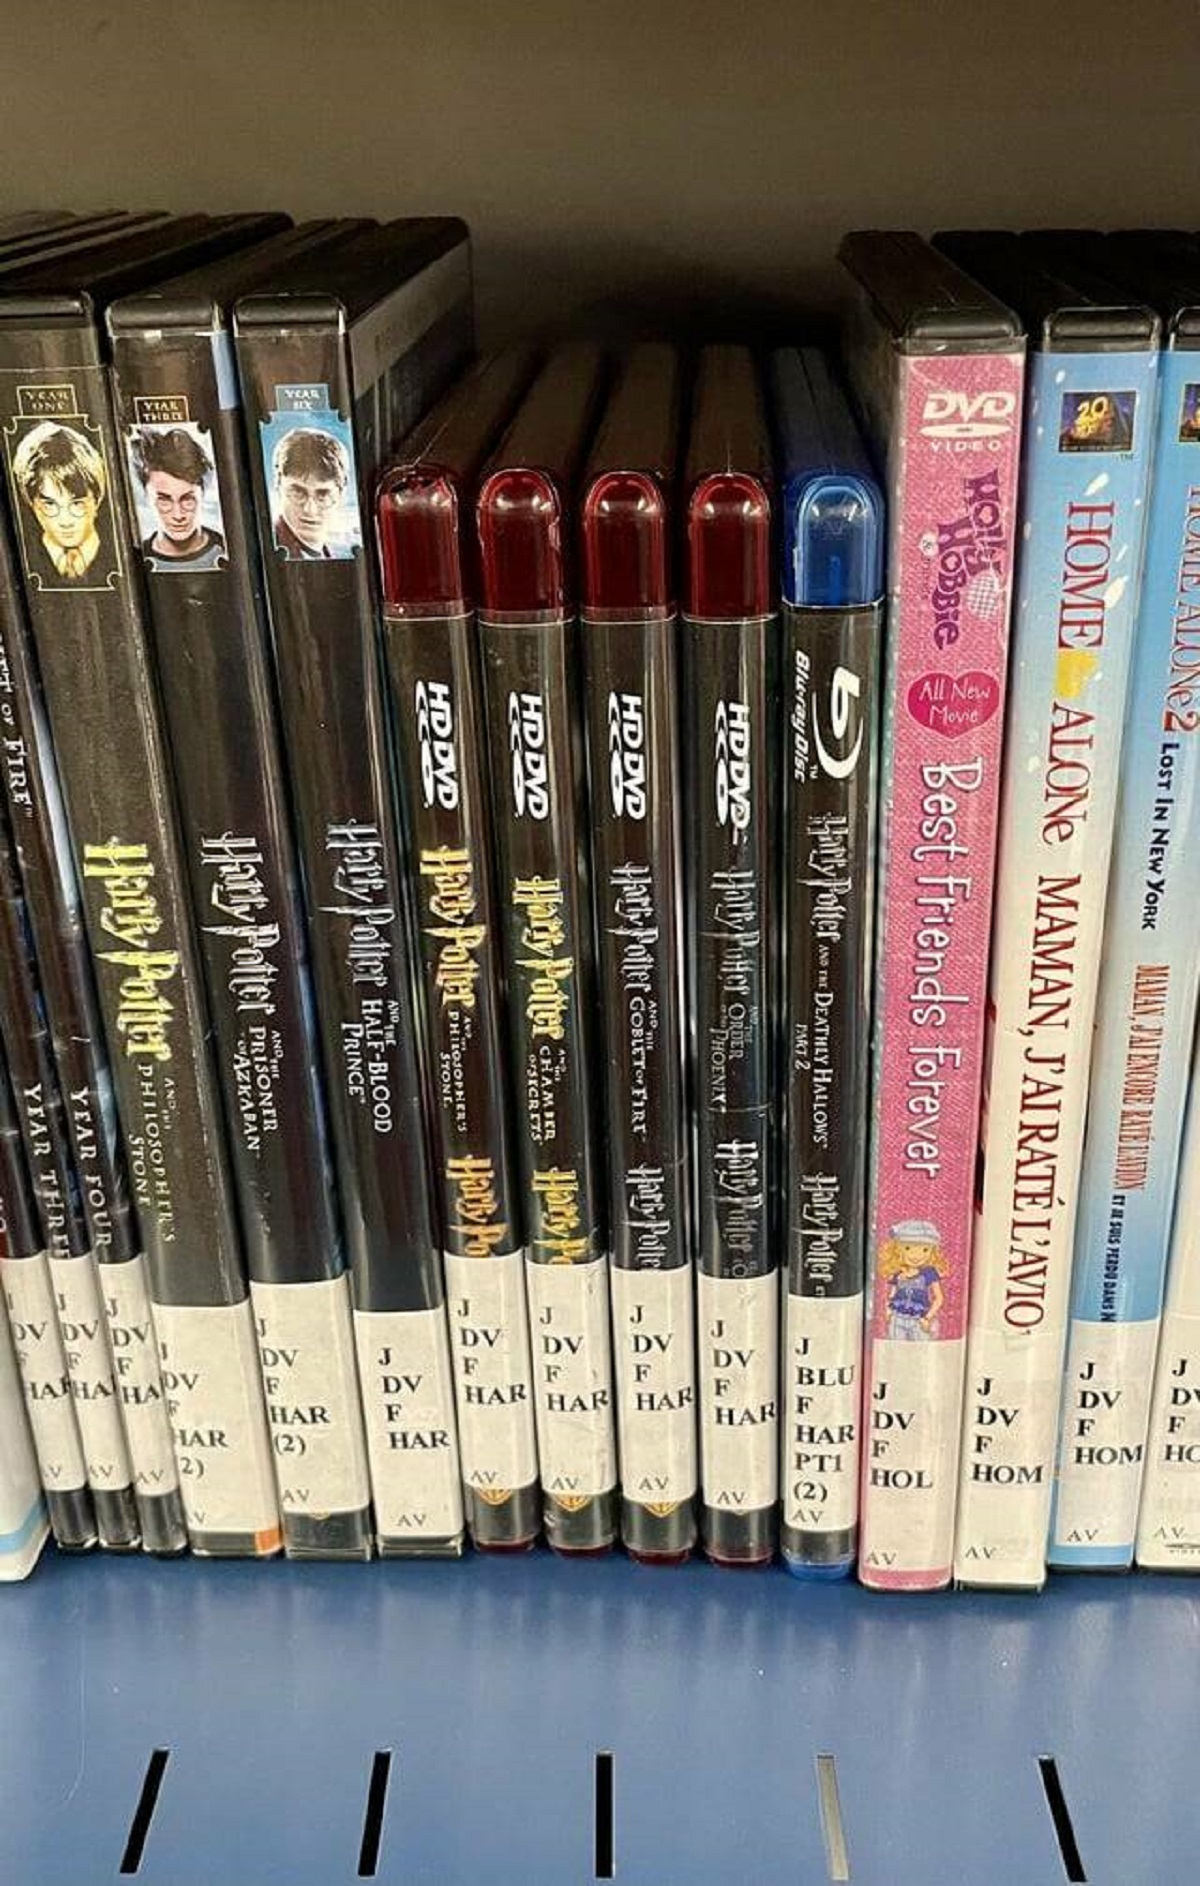 "My local library has movies on HD-DVD"